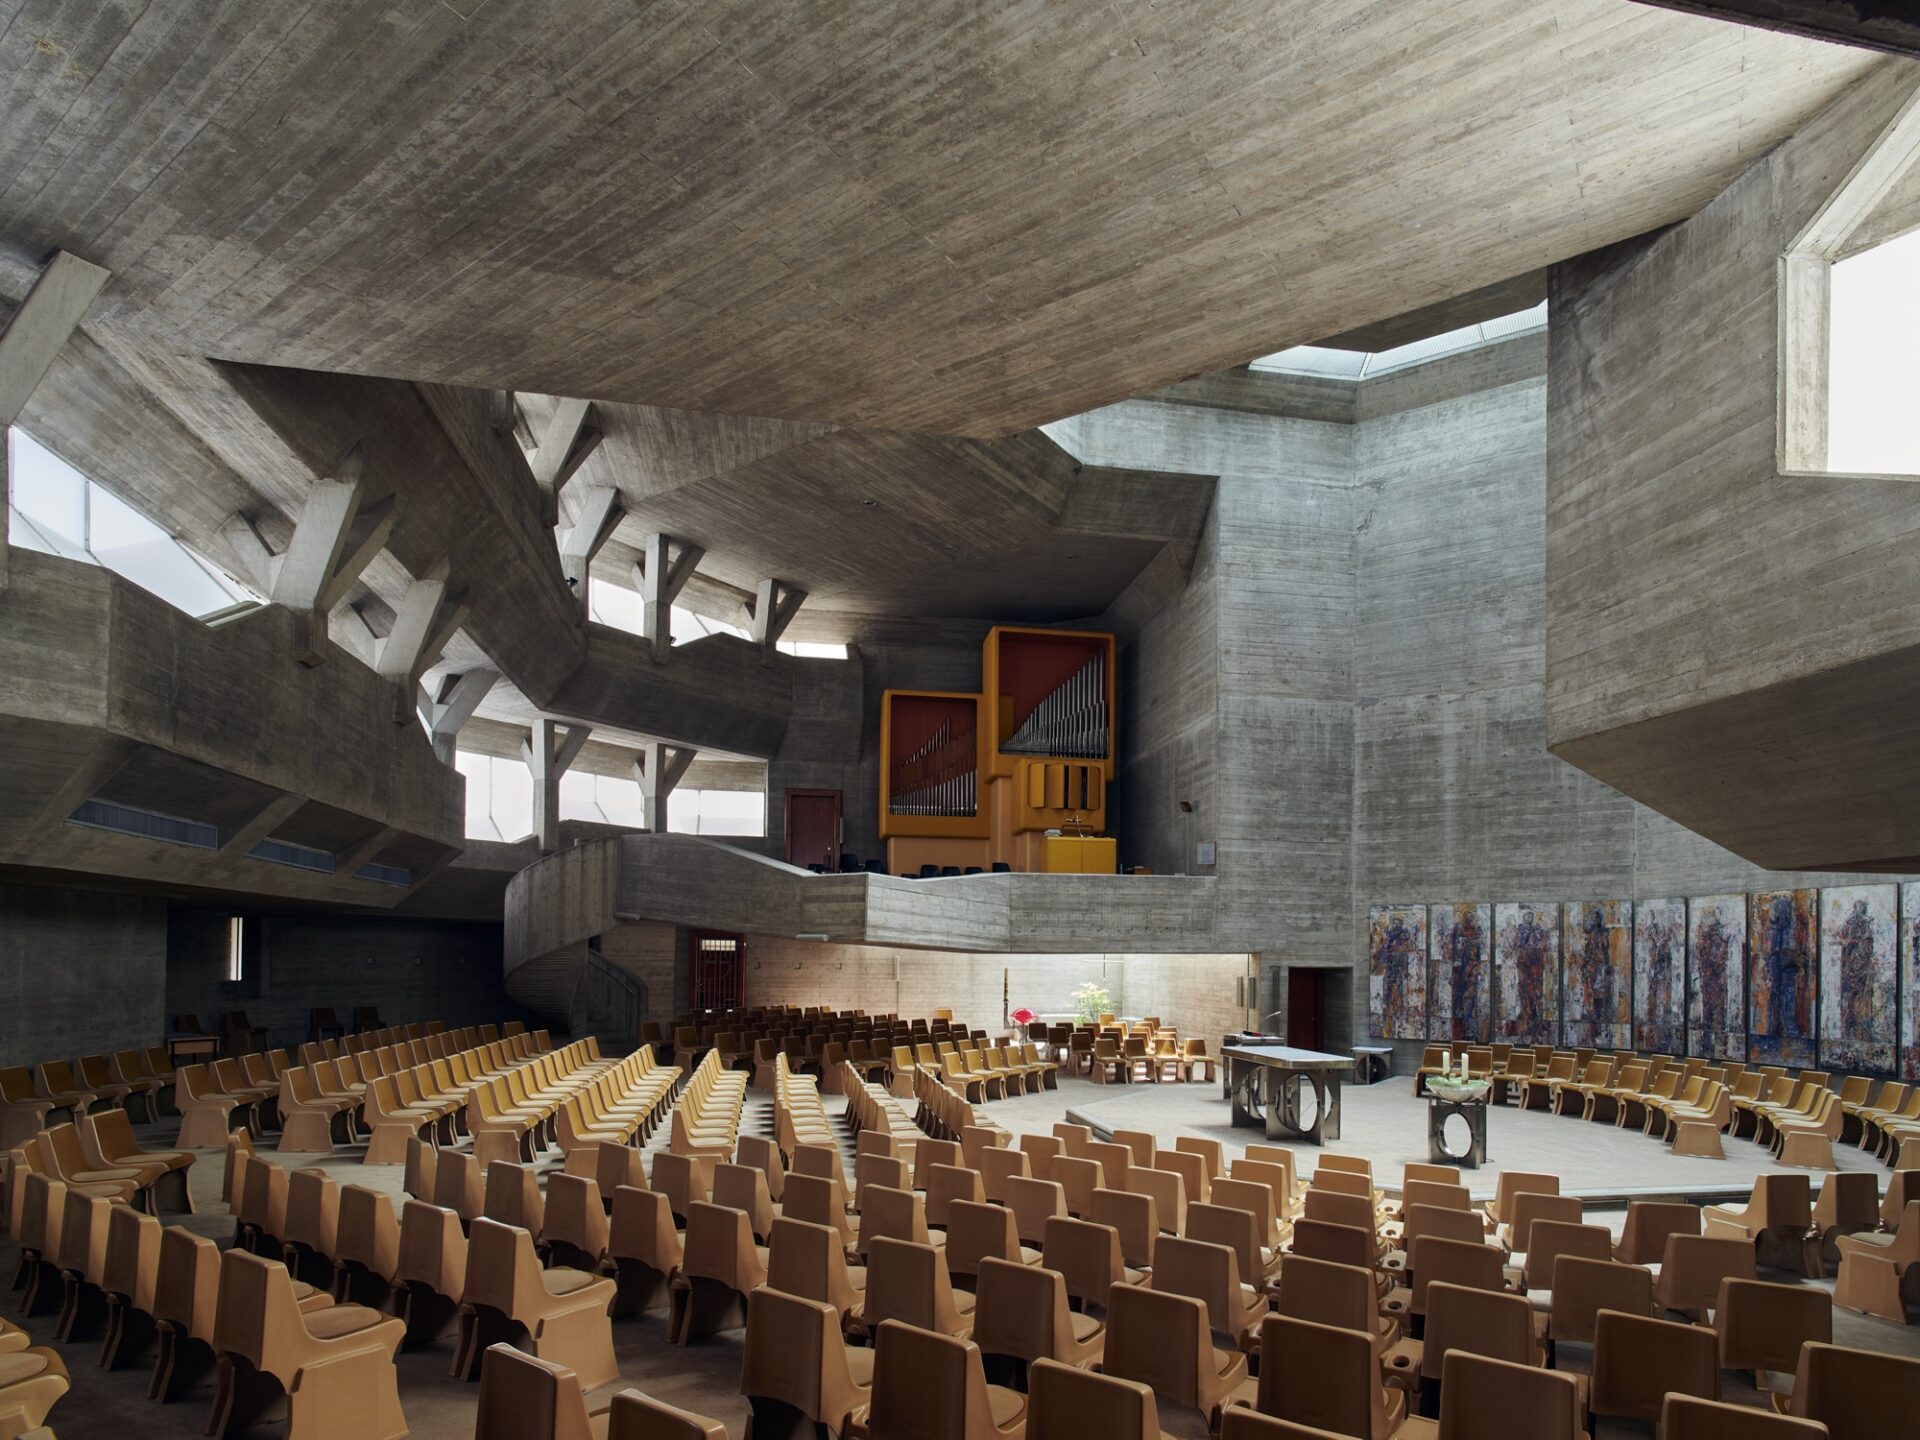 an interior overview of a large brutalist church with angular concrete walls and wooden seats